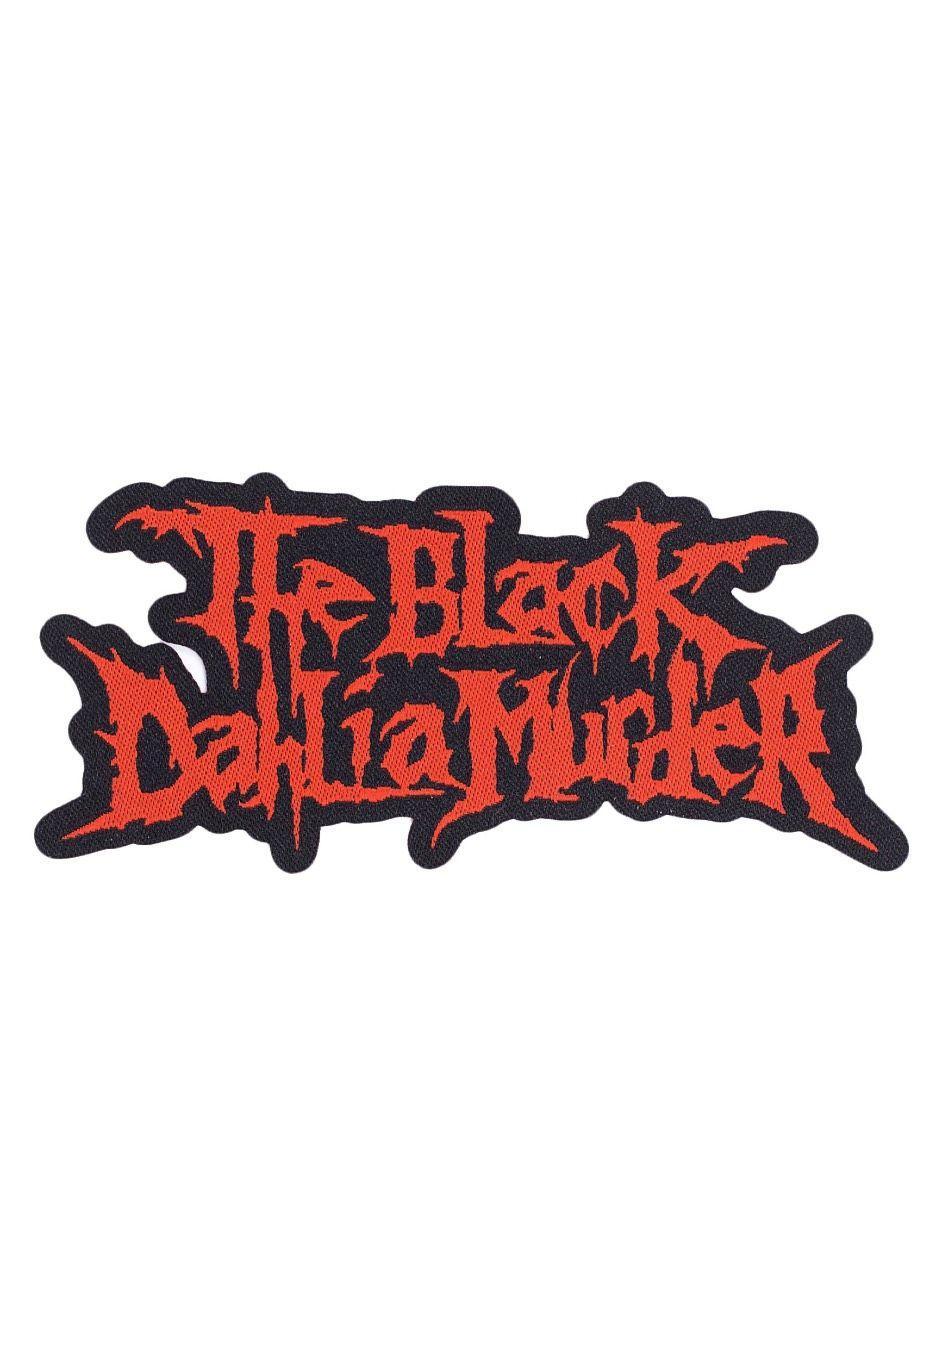 Red and Black Band Logo - The Black Dahlia Murder - Red Logo Die Cut - Patch - Impericon.com AU